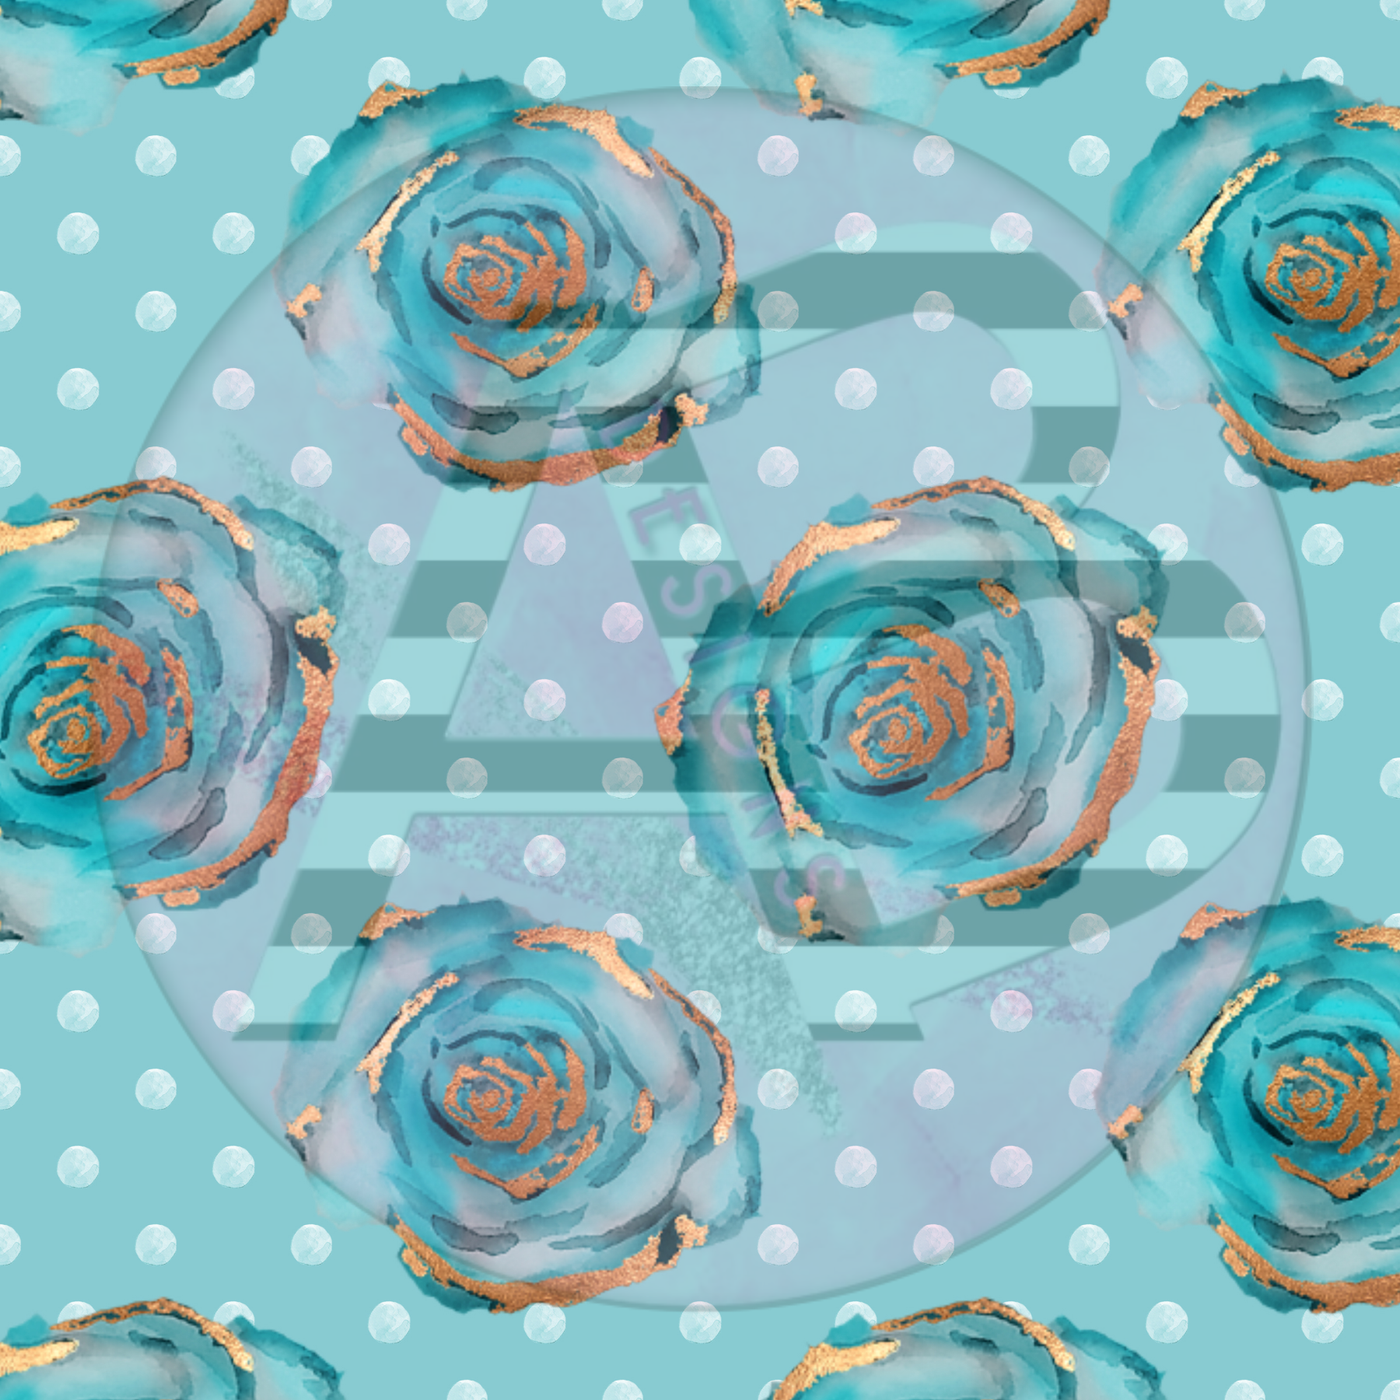 Adhesive Patterned Vinyl - Teal and Copper Floral 07